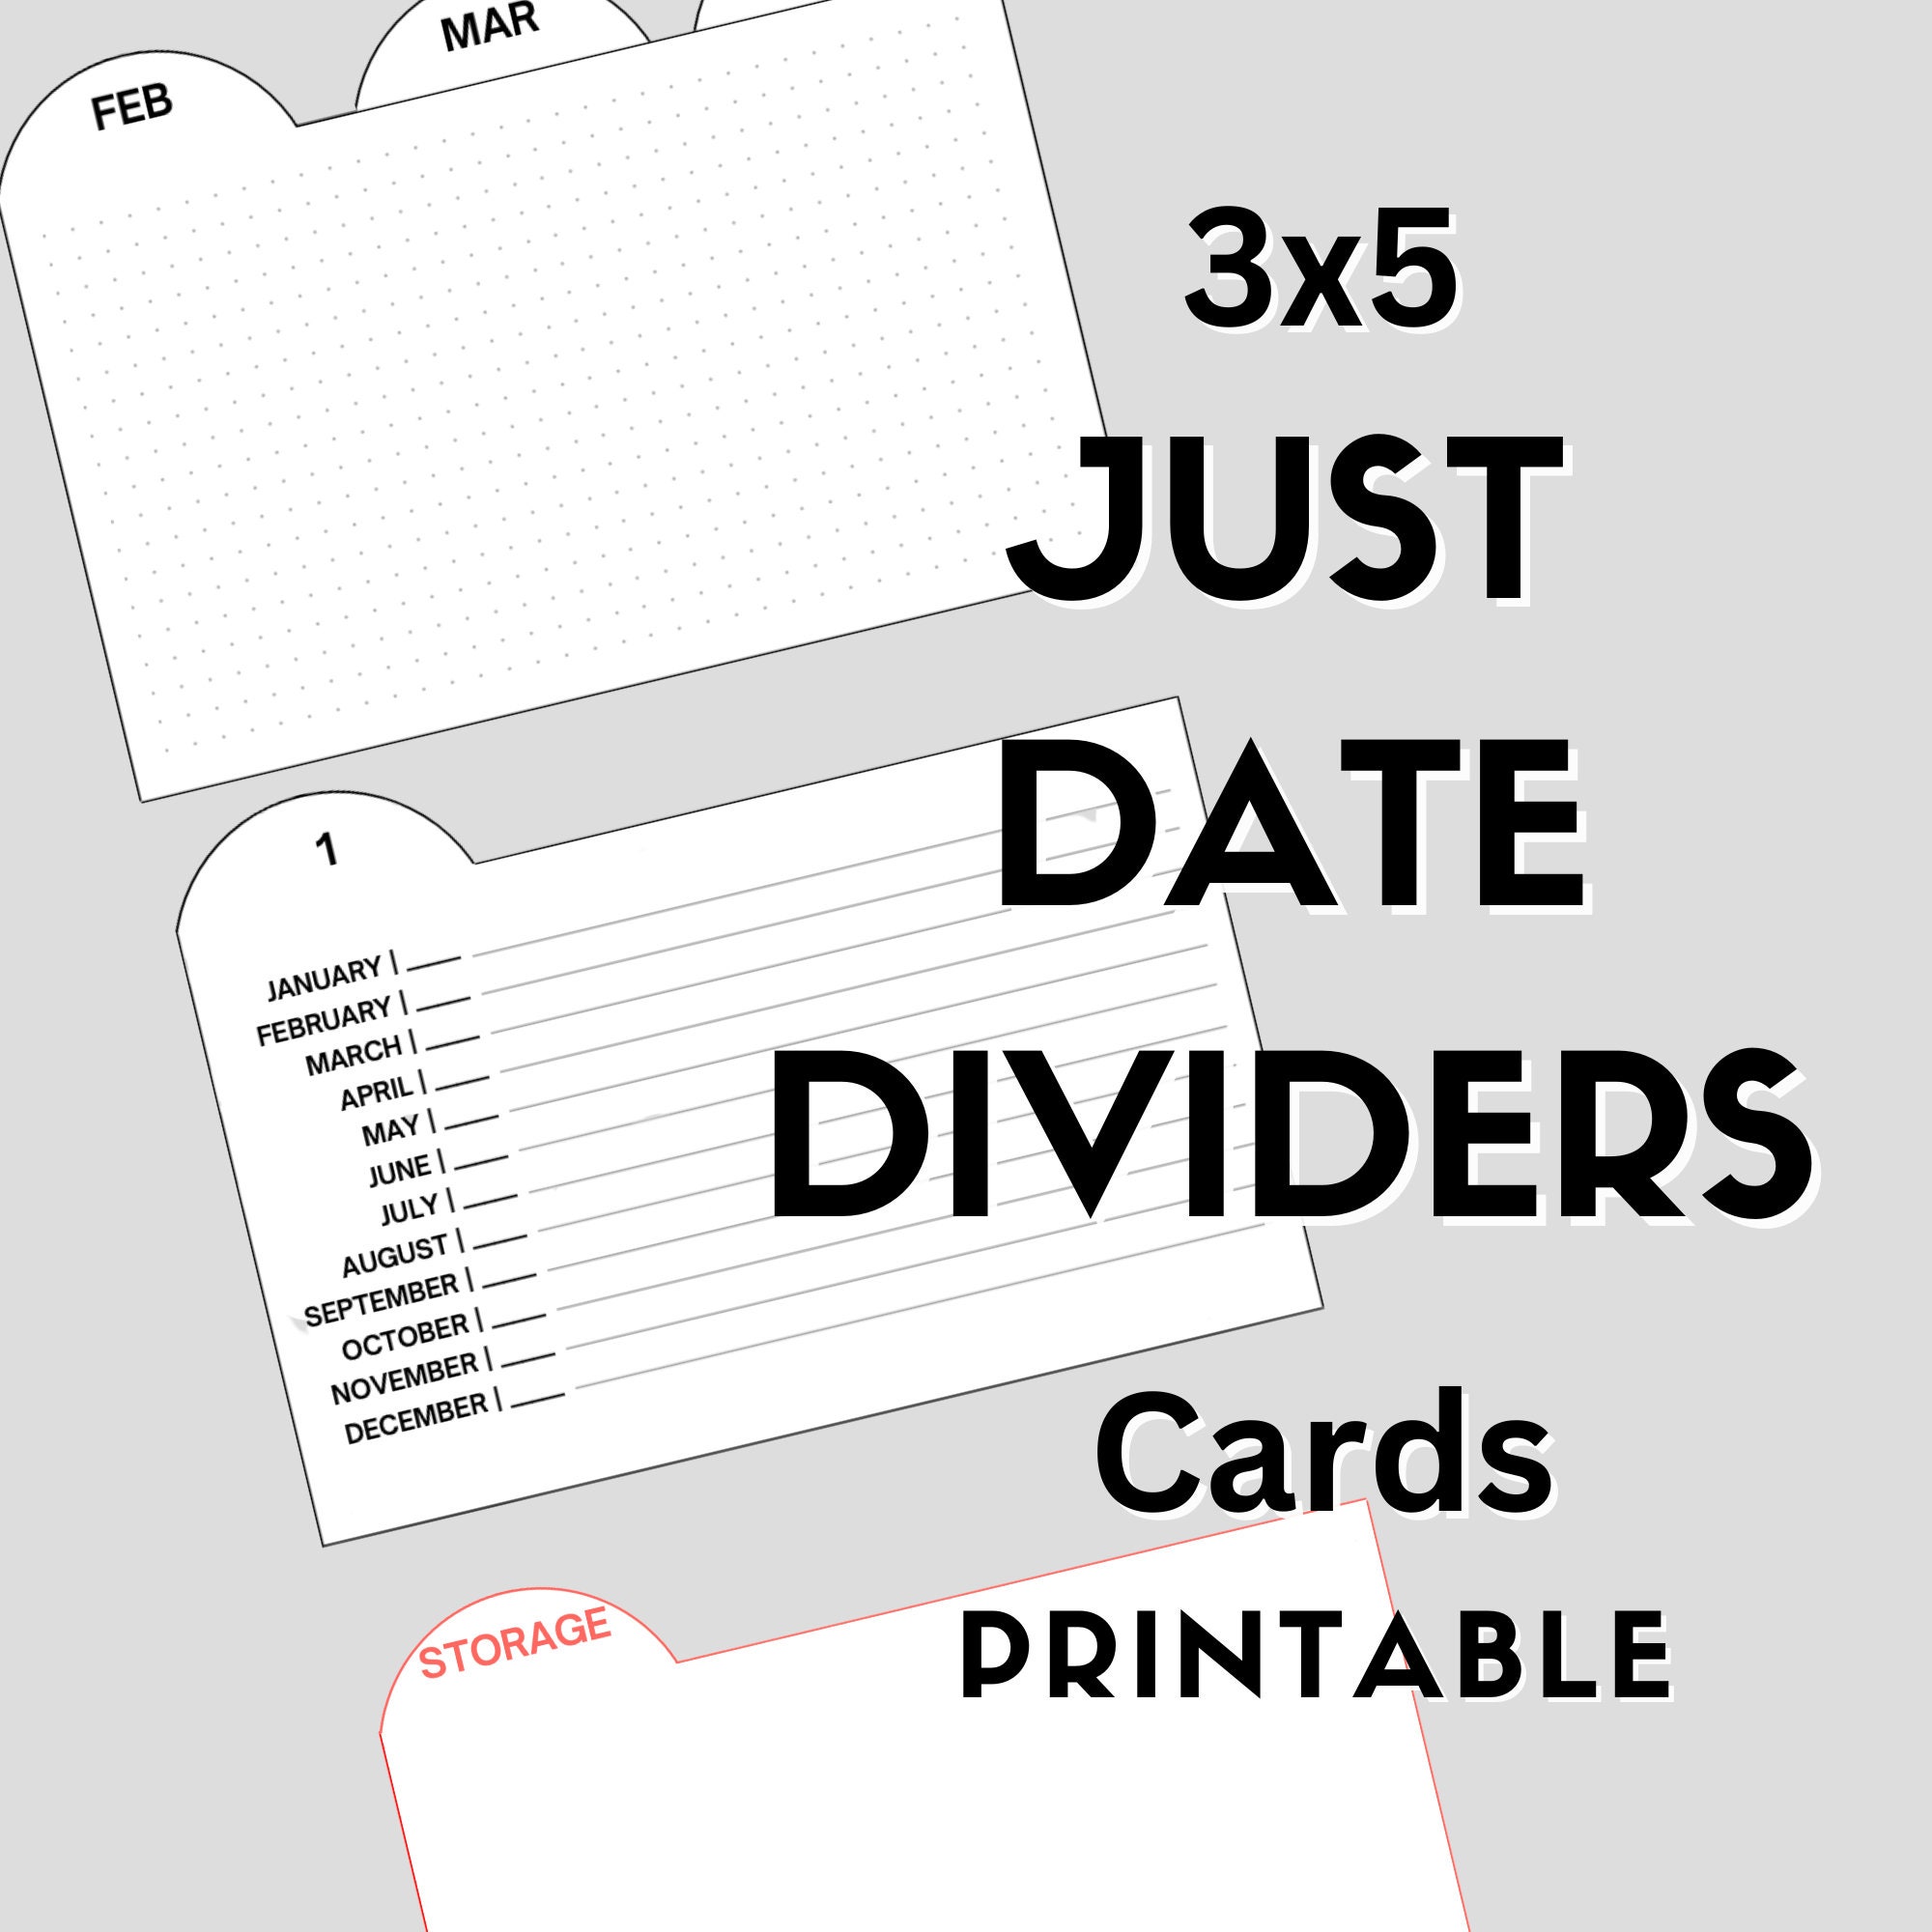 Lined File Dividers Multicolor Index Card Organizer Card Guides